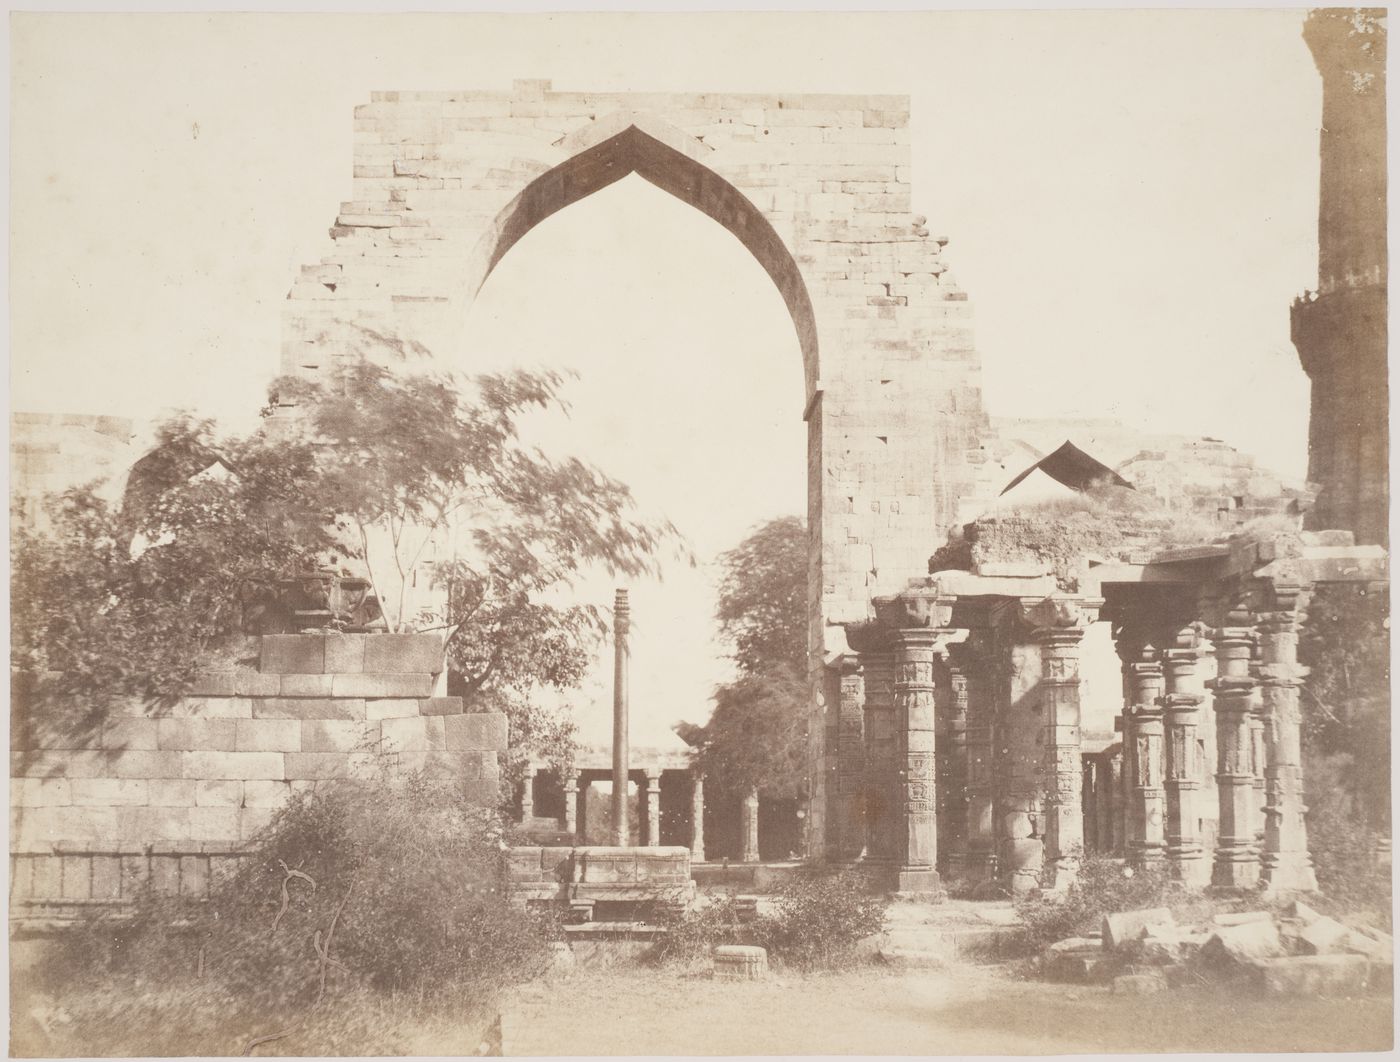 View of the courtyard of the Quwwat al-Islam [Might of Islam] Mosque  showing the Iron Pillar with the Qutb Minar on the far right, Quwwat al-Islam Mosque Complex, Delhi, India